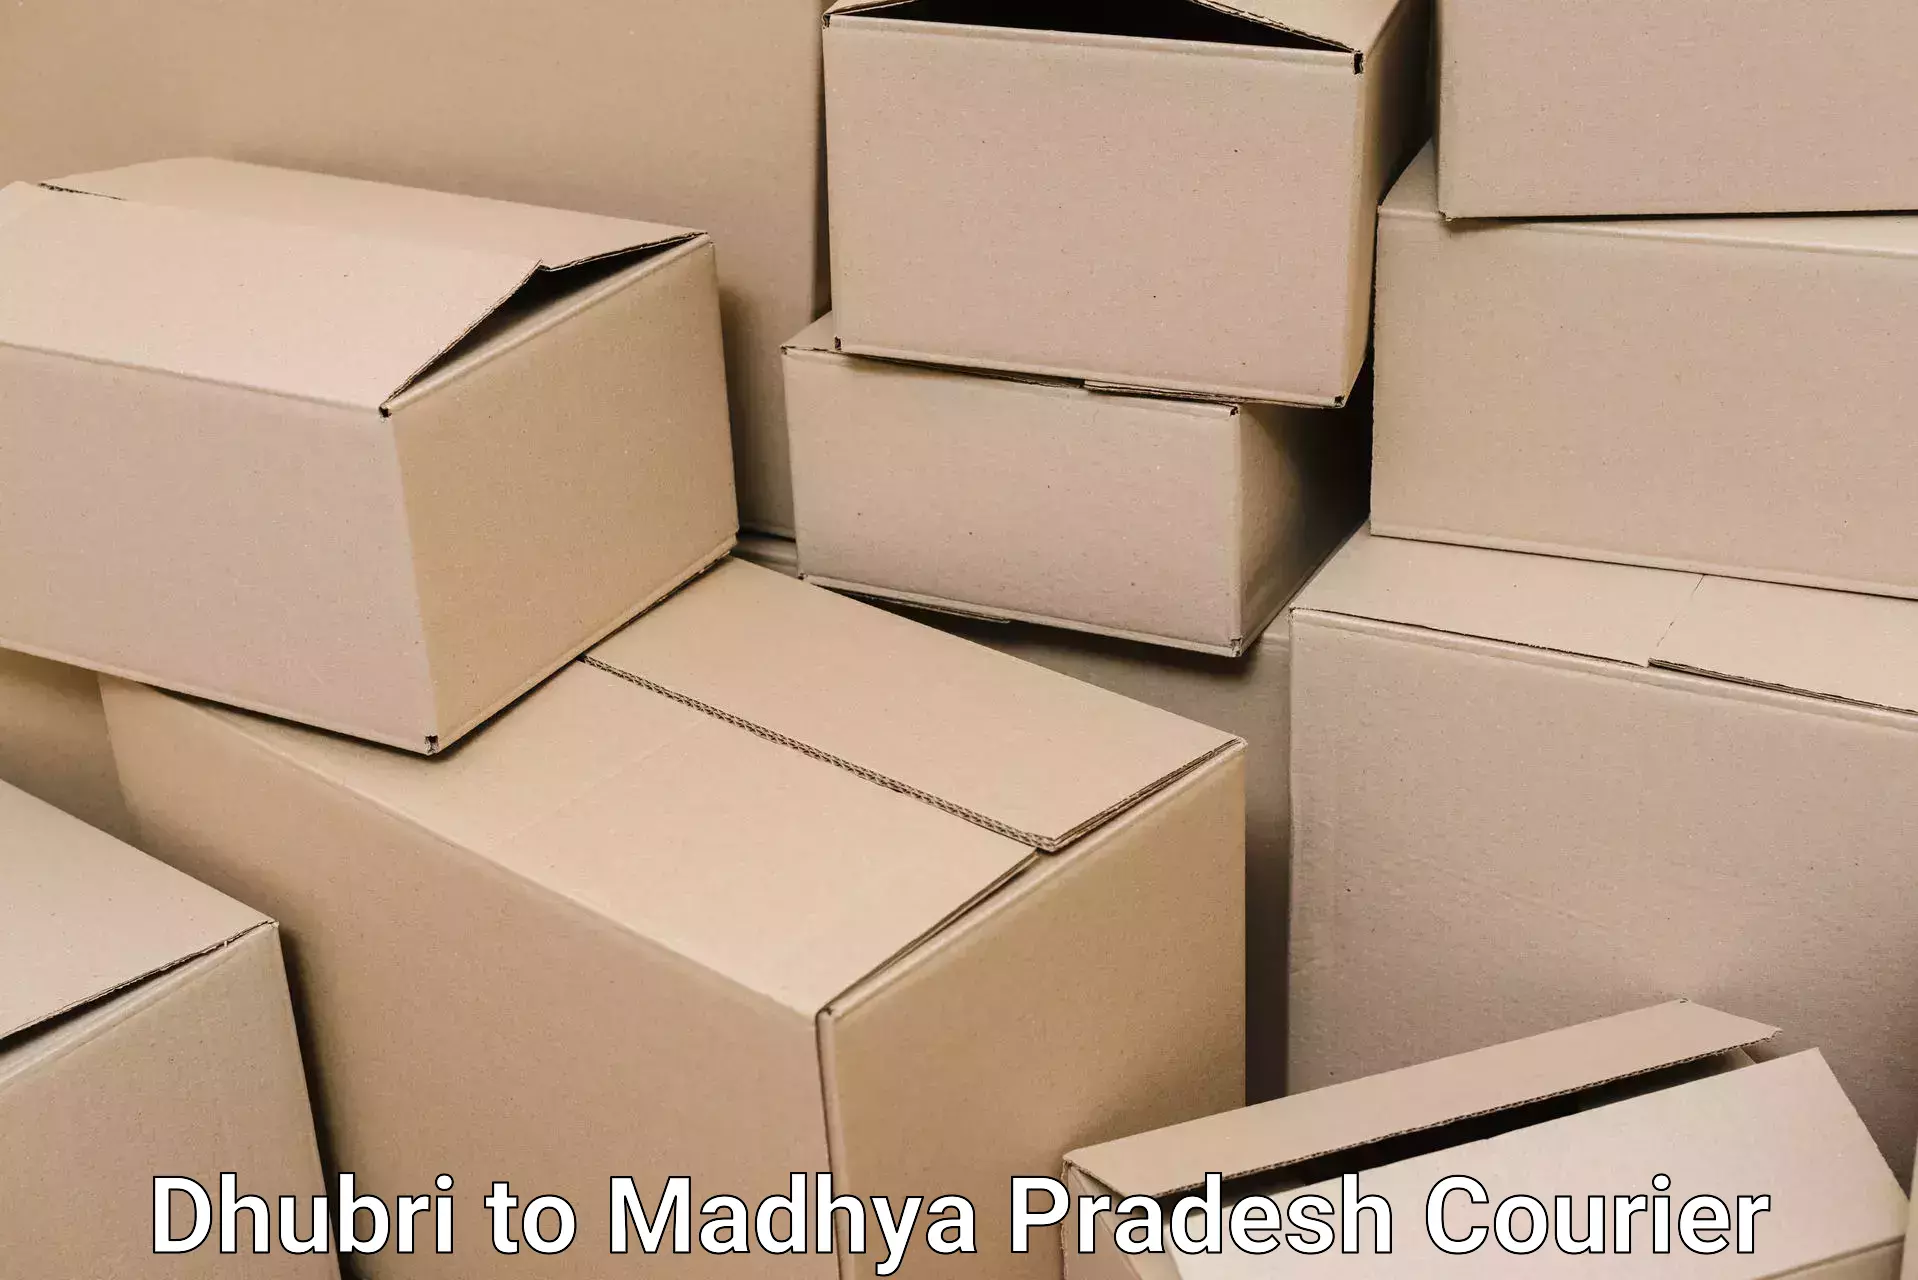 Efficient packing and moving Dhubri to Chandla